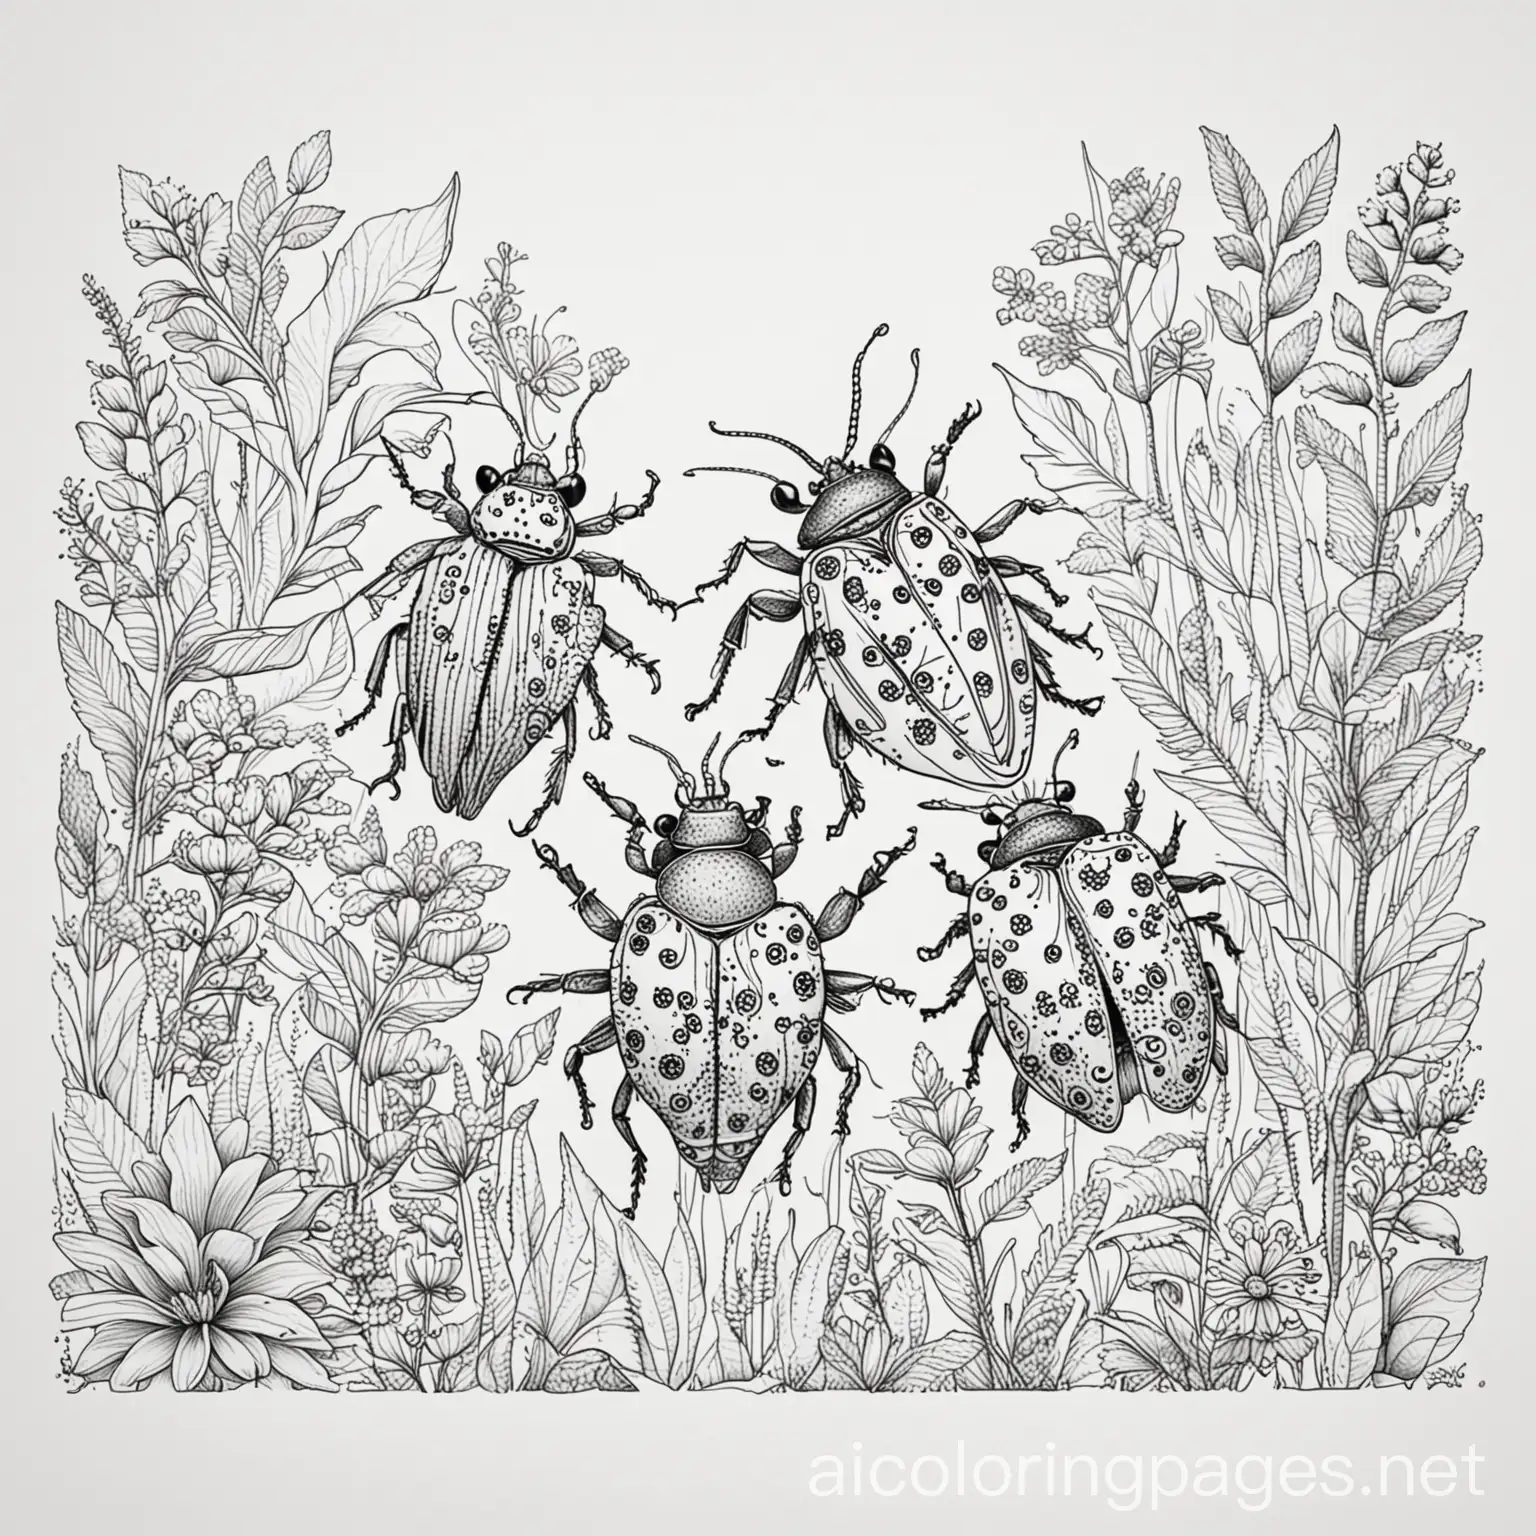 Spring bugs, Coloring Page, black and white, line art, white background, Simplicity, Ample White Space. The background of the coloring page is plain white to make it easy for young children to color within the lines. The outlines of all the subjects are easy to distinguish, making it simple for kids to color without too much difficulty